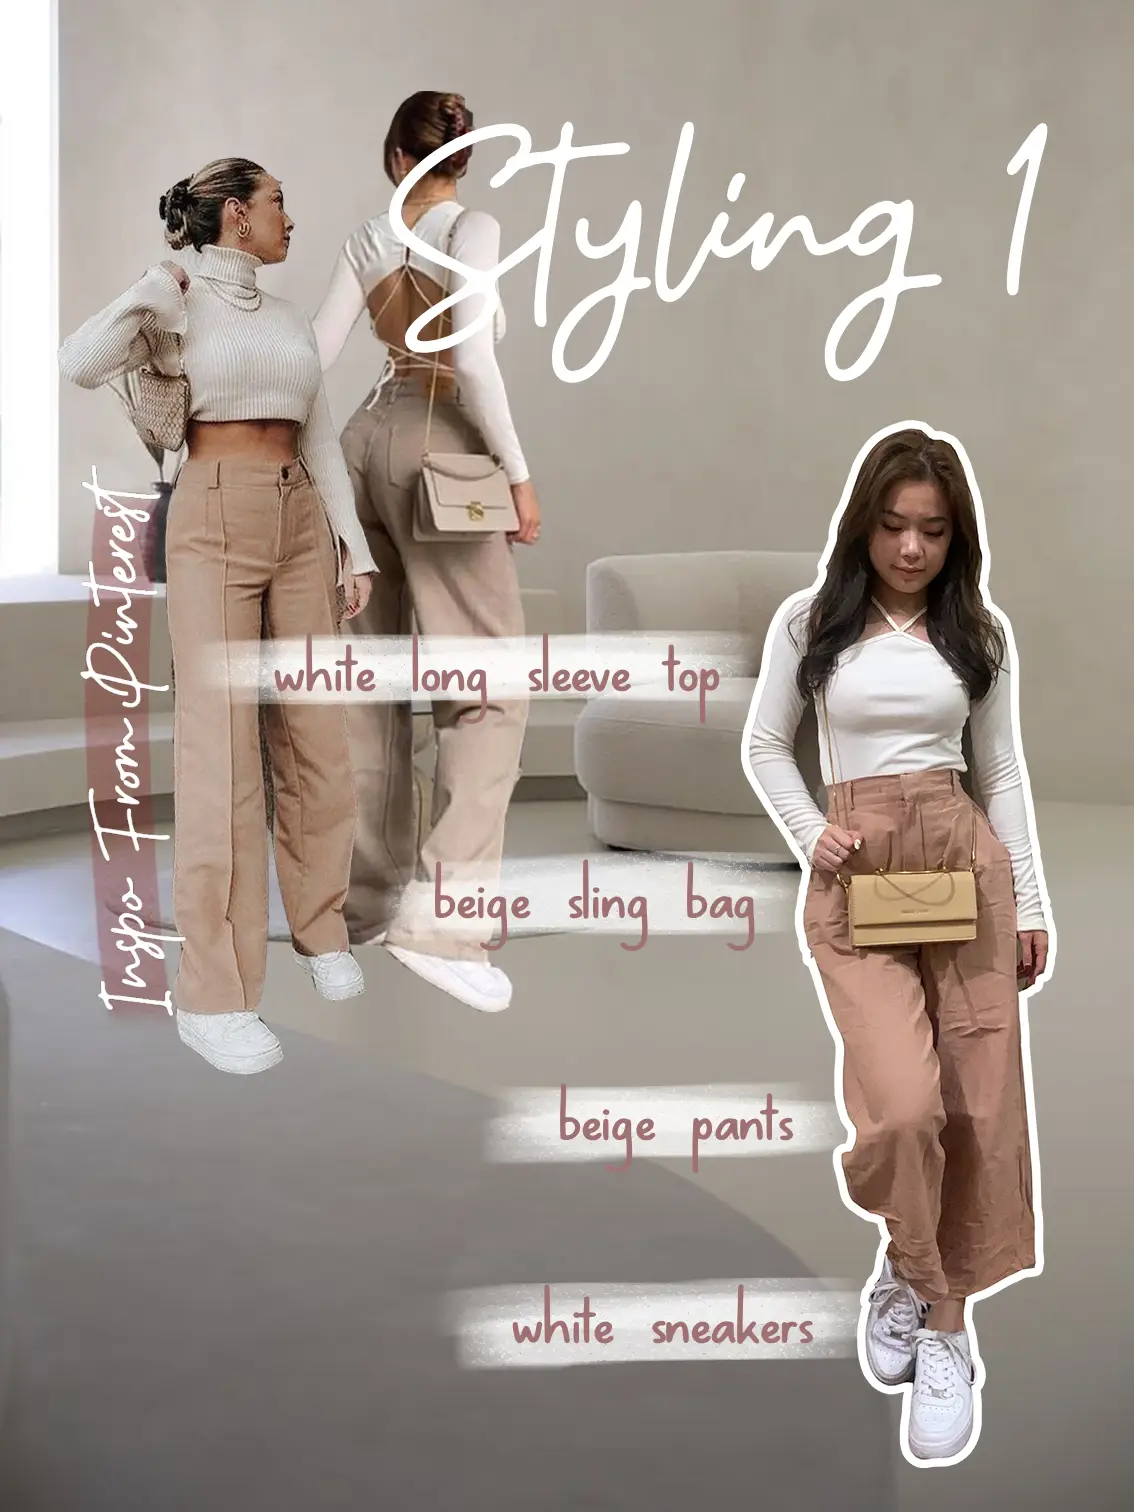 Neutral Outfit Time 🪴, Gallery posted by 𝓼𝓱𝓮𝓵𝓵𝓪 👒🩰🎐